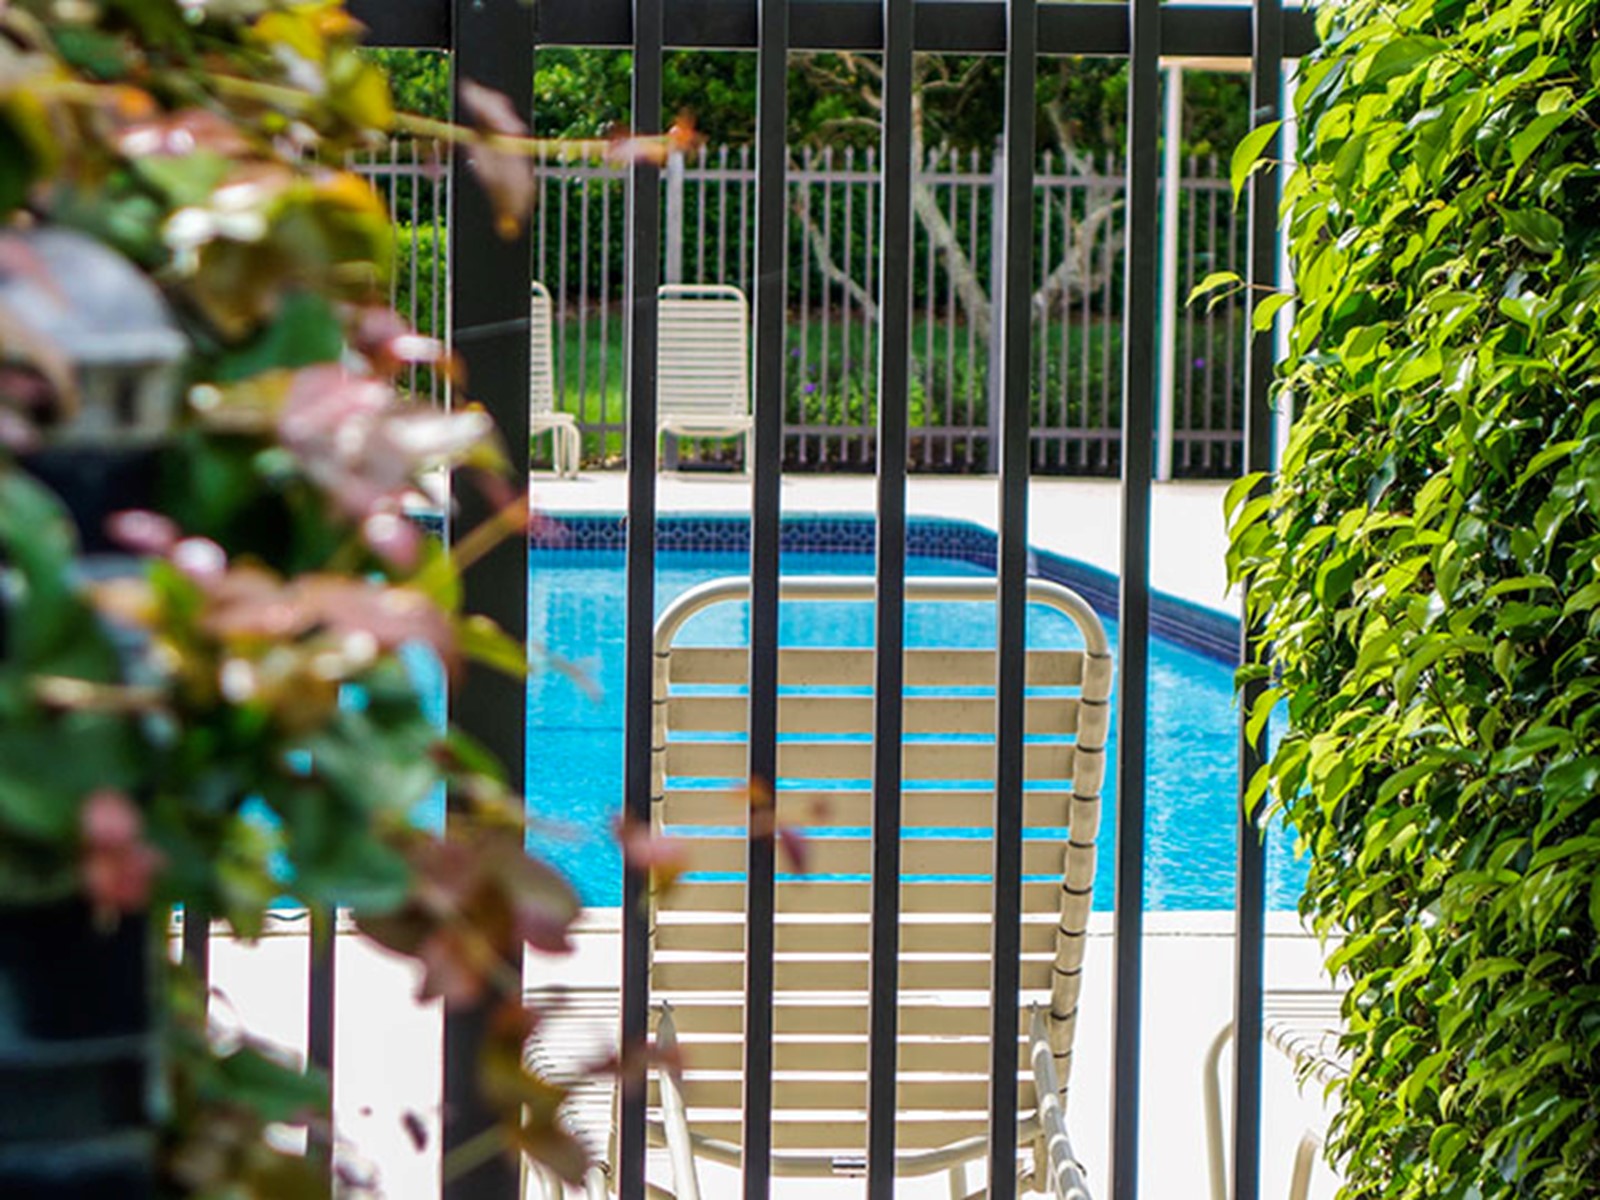 Pool behind a fence